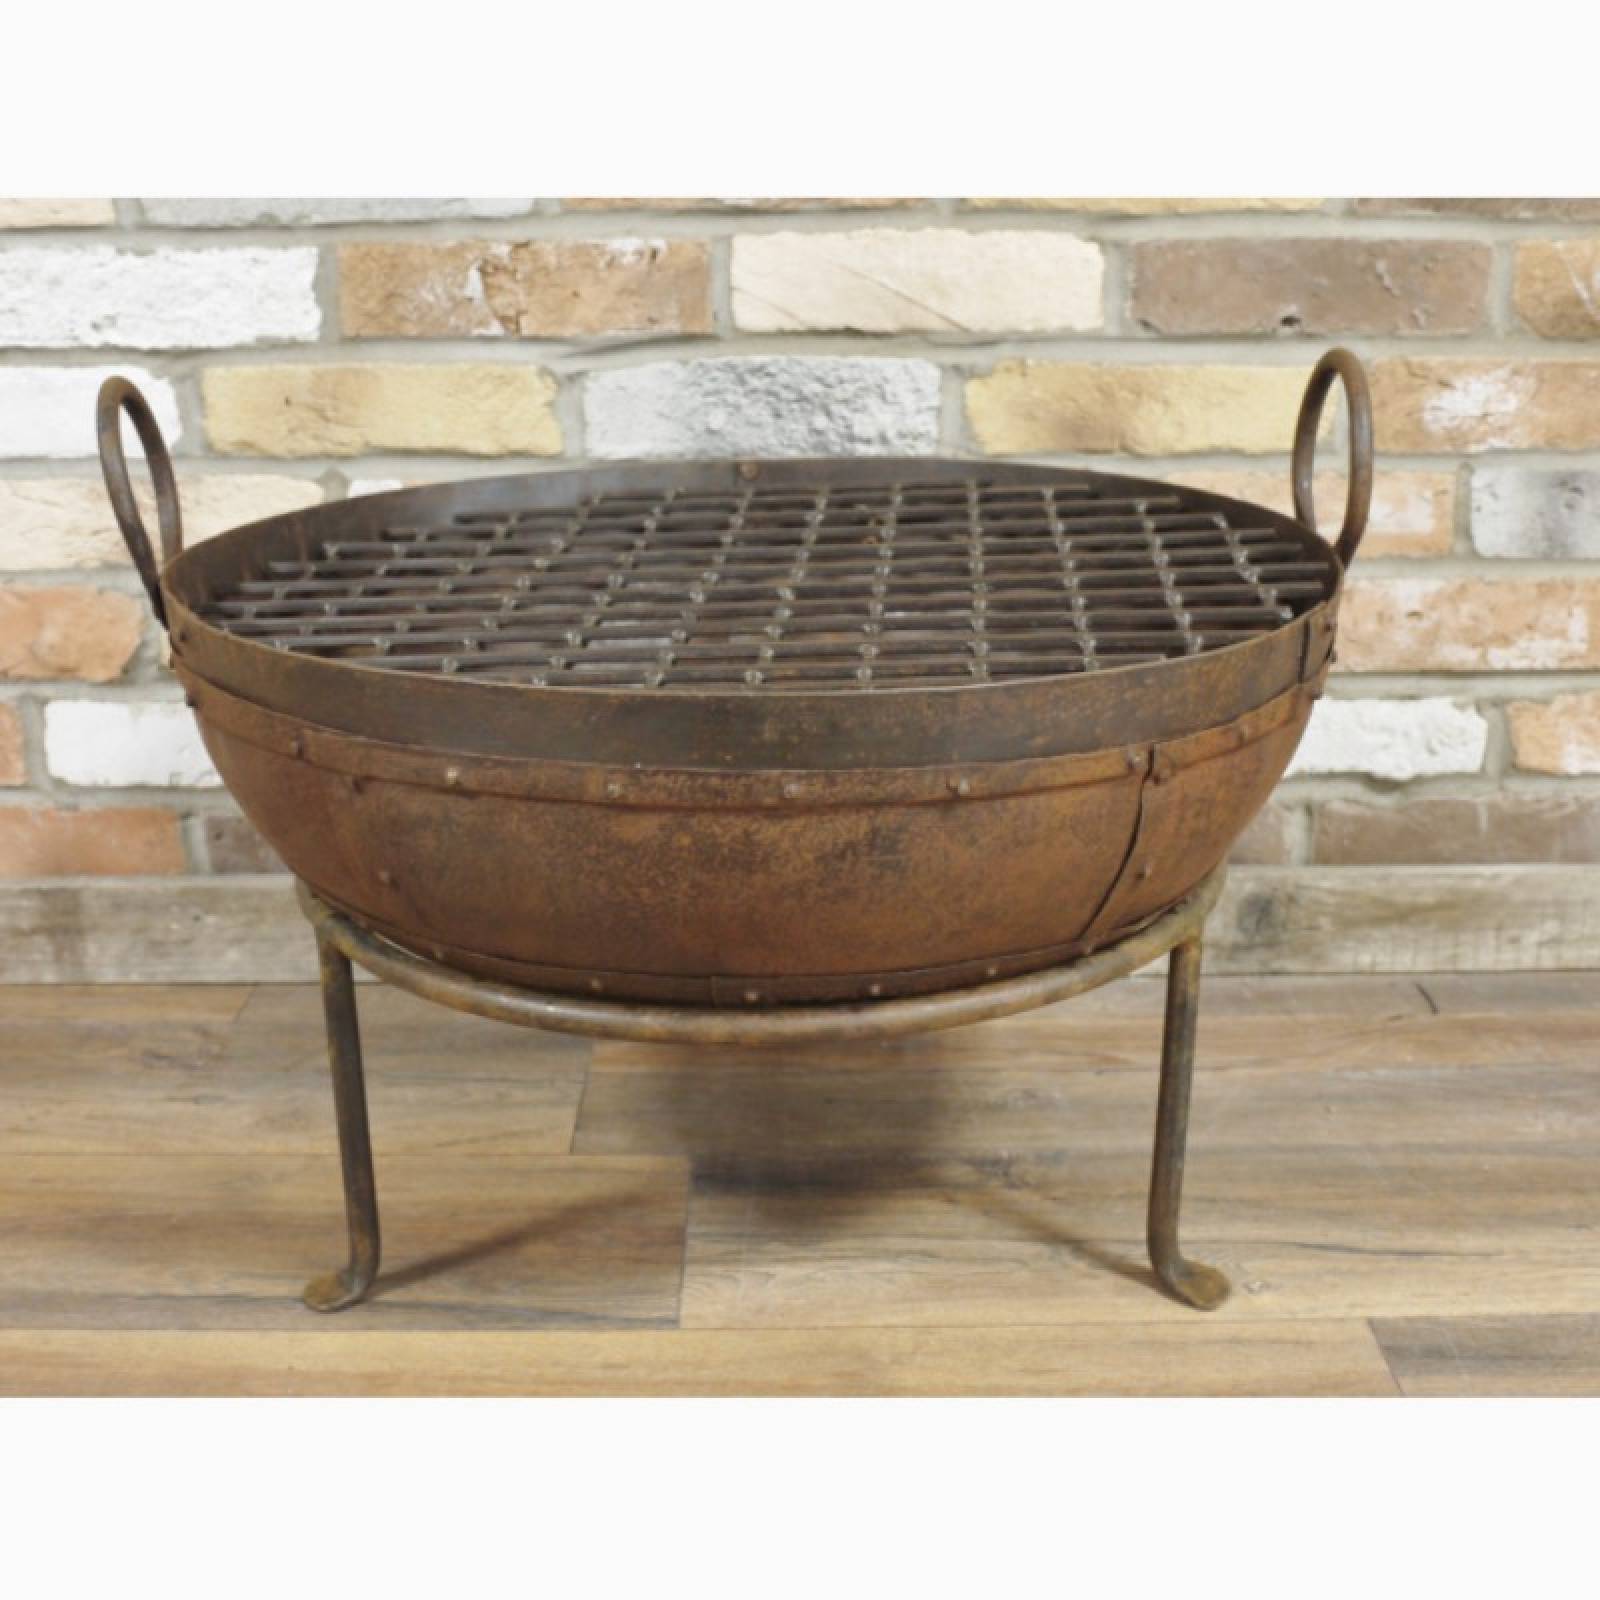 Metal Fire Pit Bowl On Stand 60cm thumbnails